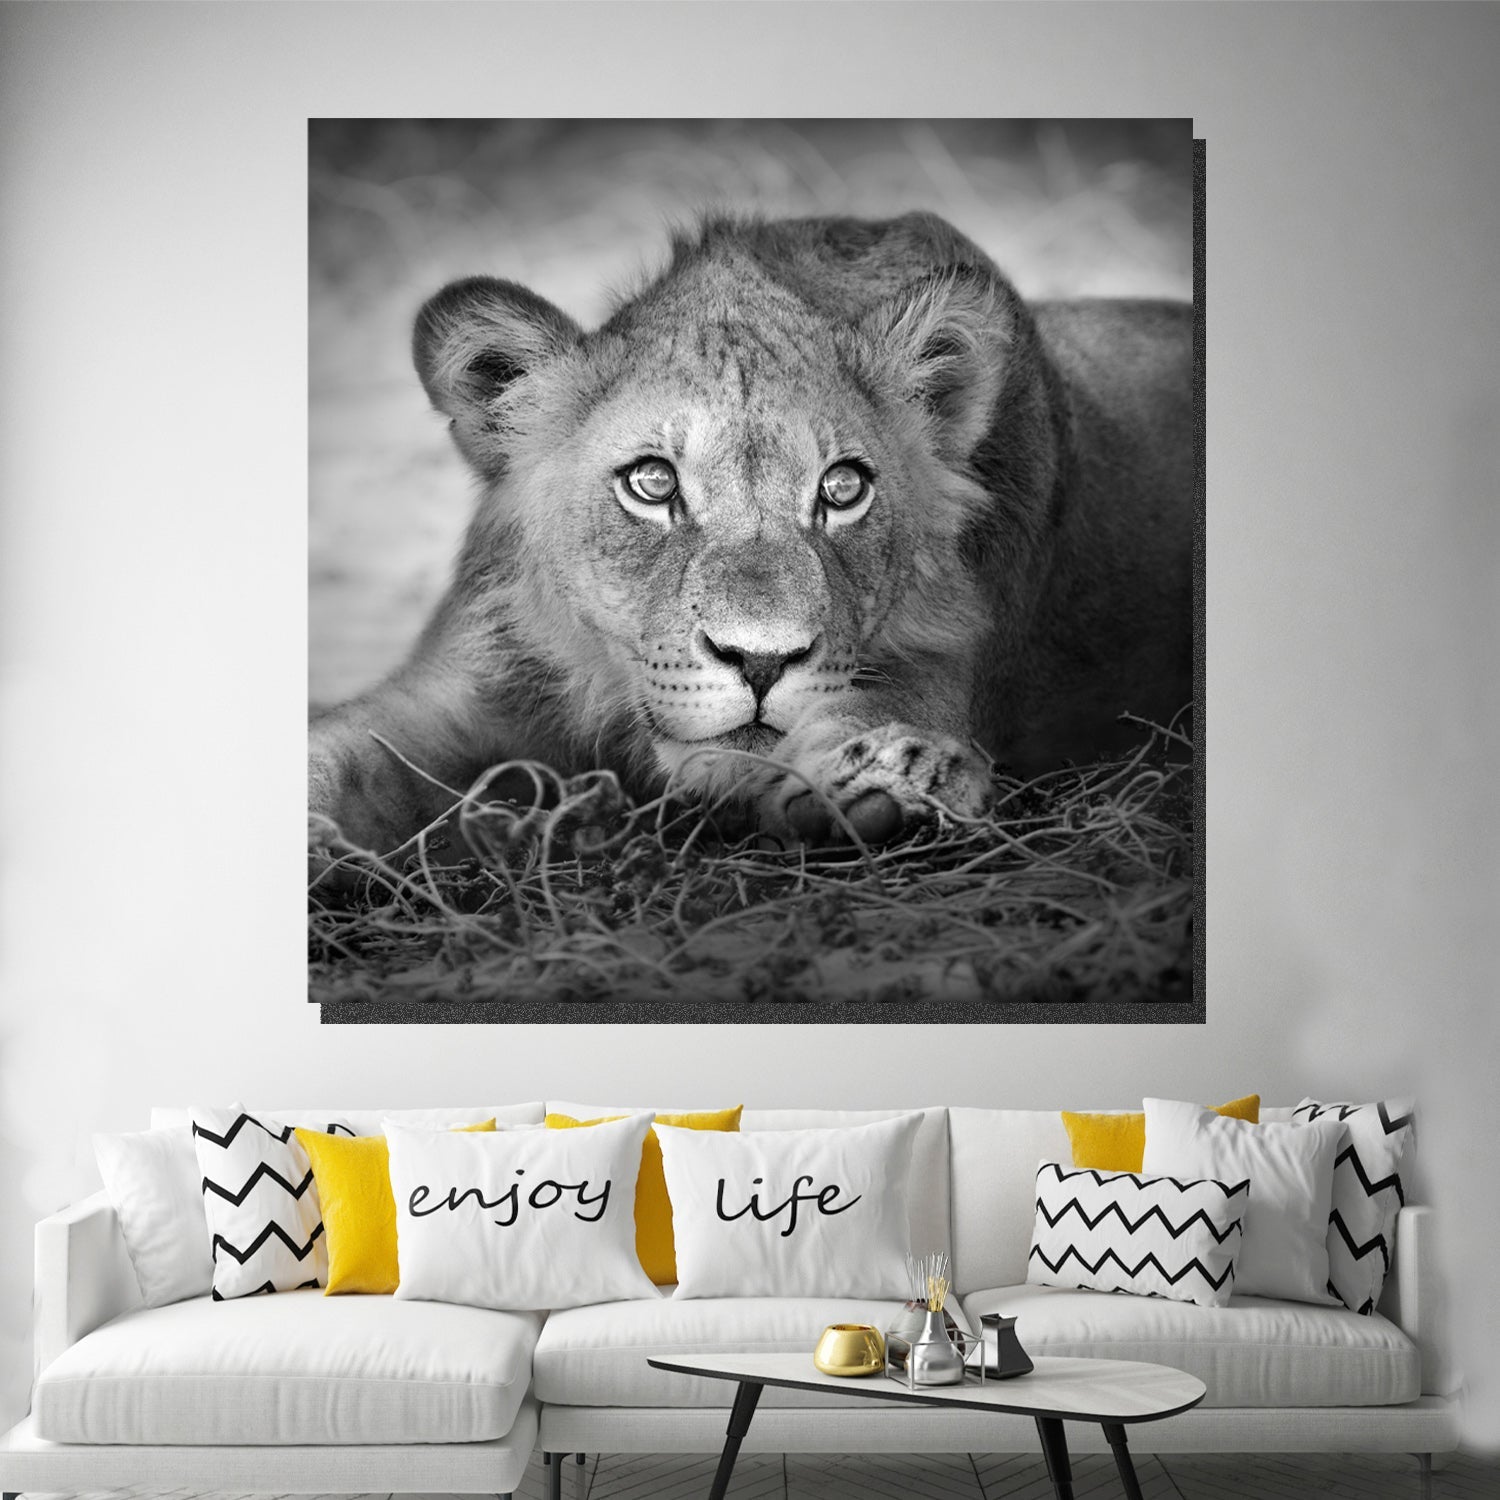 https://cdn.shopify.com/s/files/1/0387/9986/8044/products/ATeenLionCanvasArtprintStretched-4.jpg